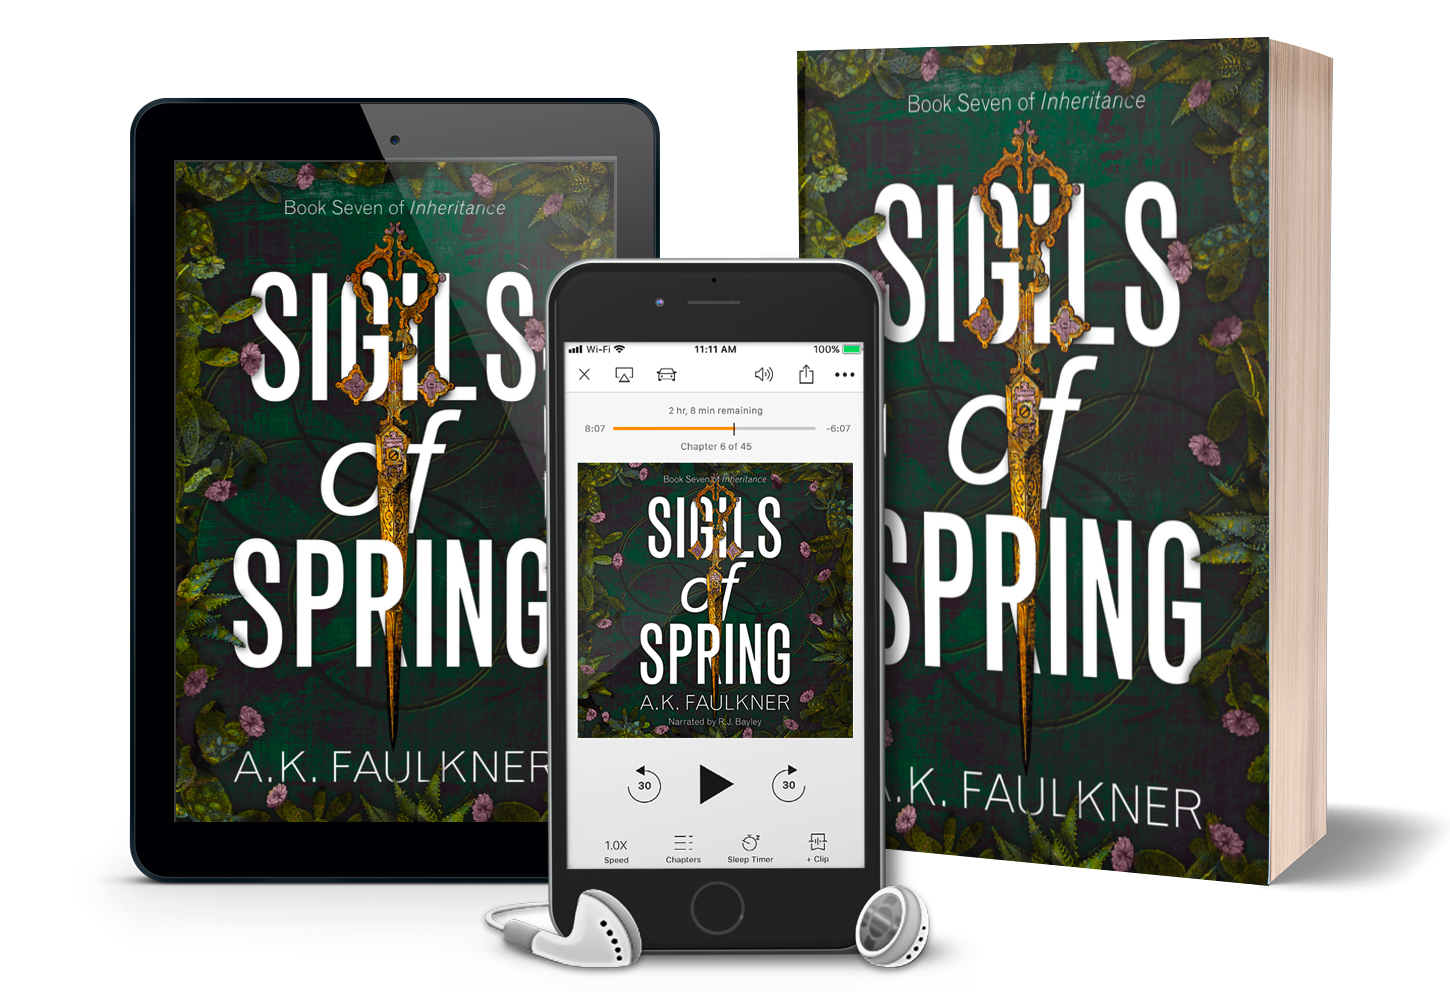 Sigils of Spring as an ebook, audiobook, and paperback